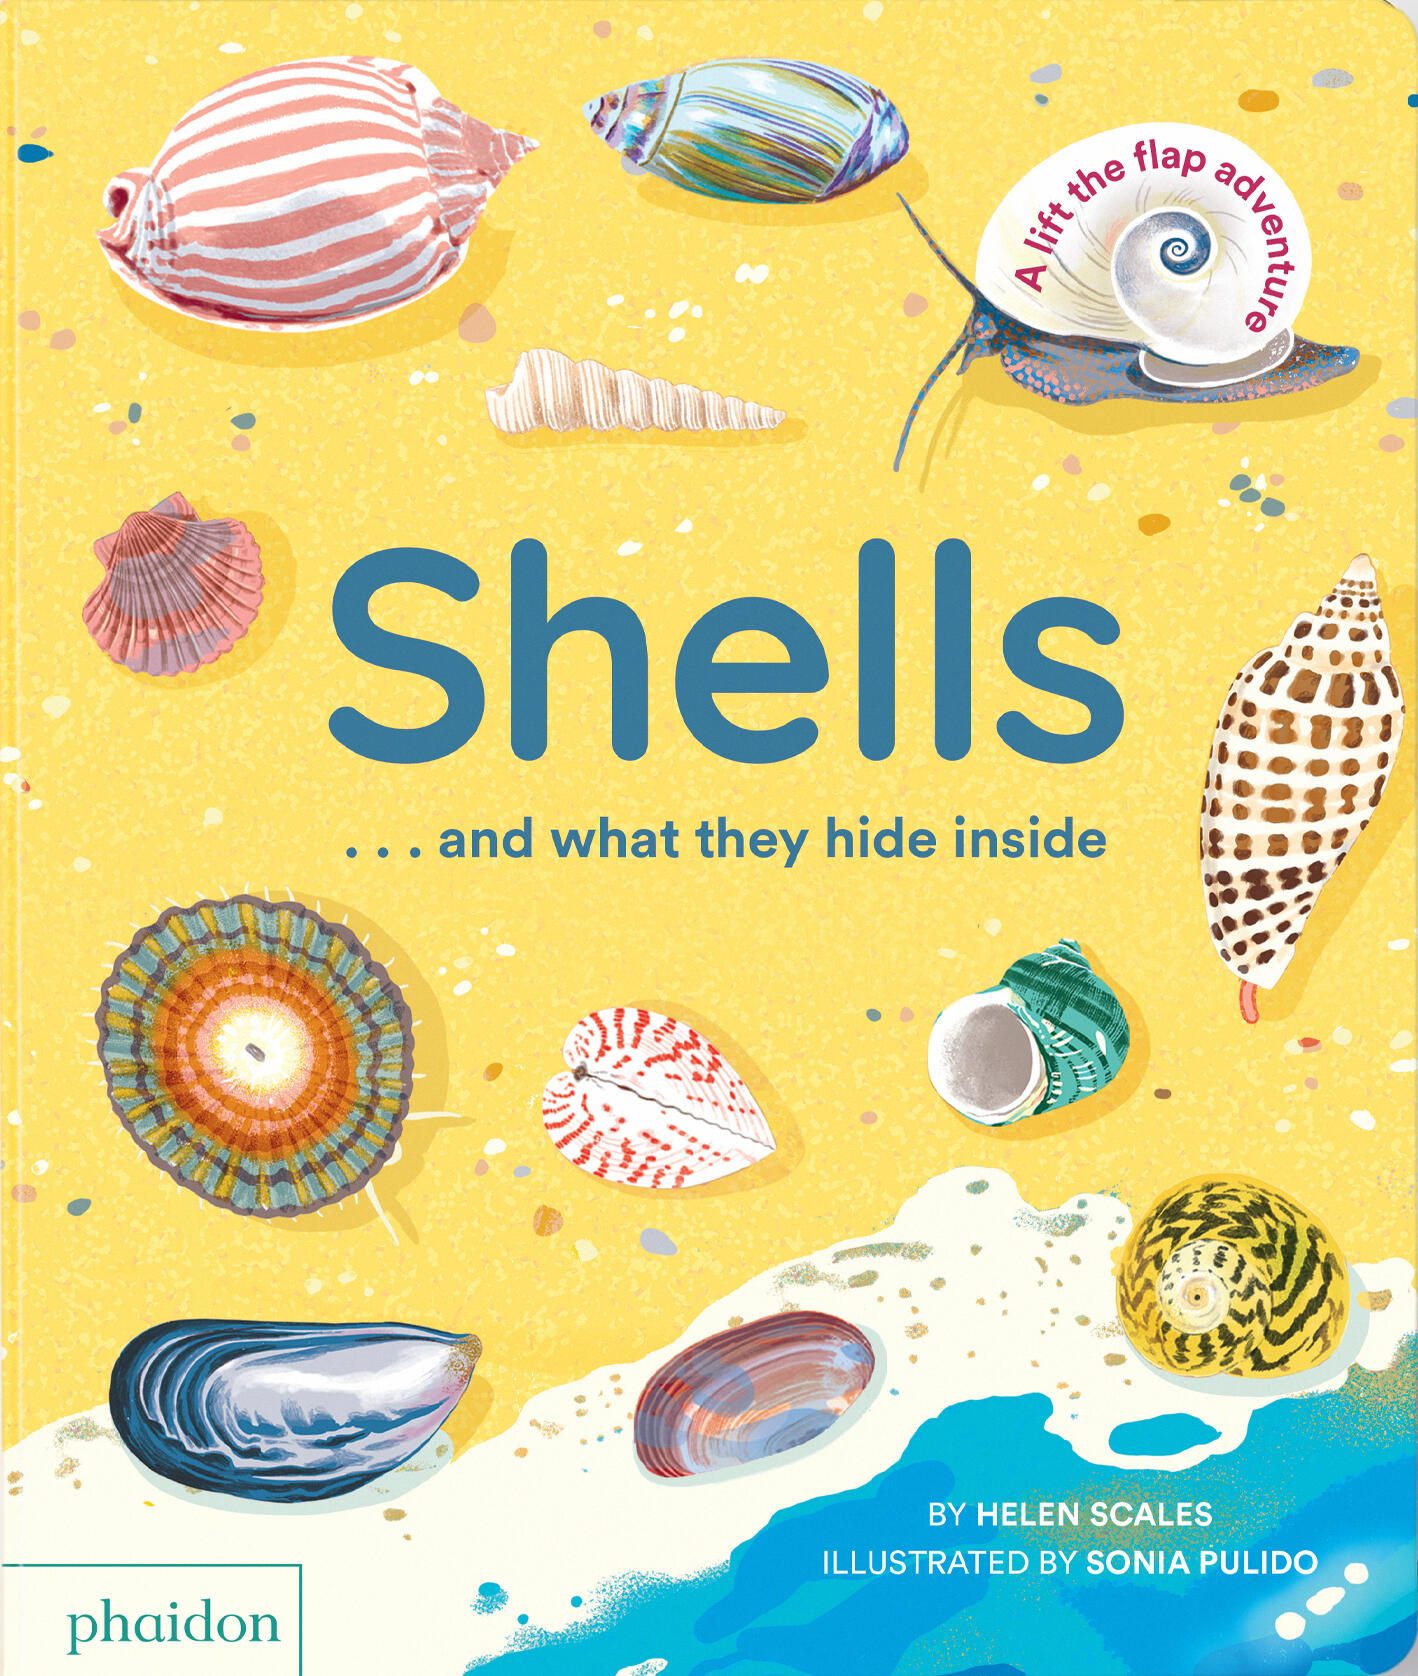 Shells... and what they hide inside